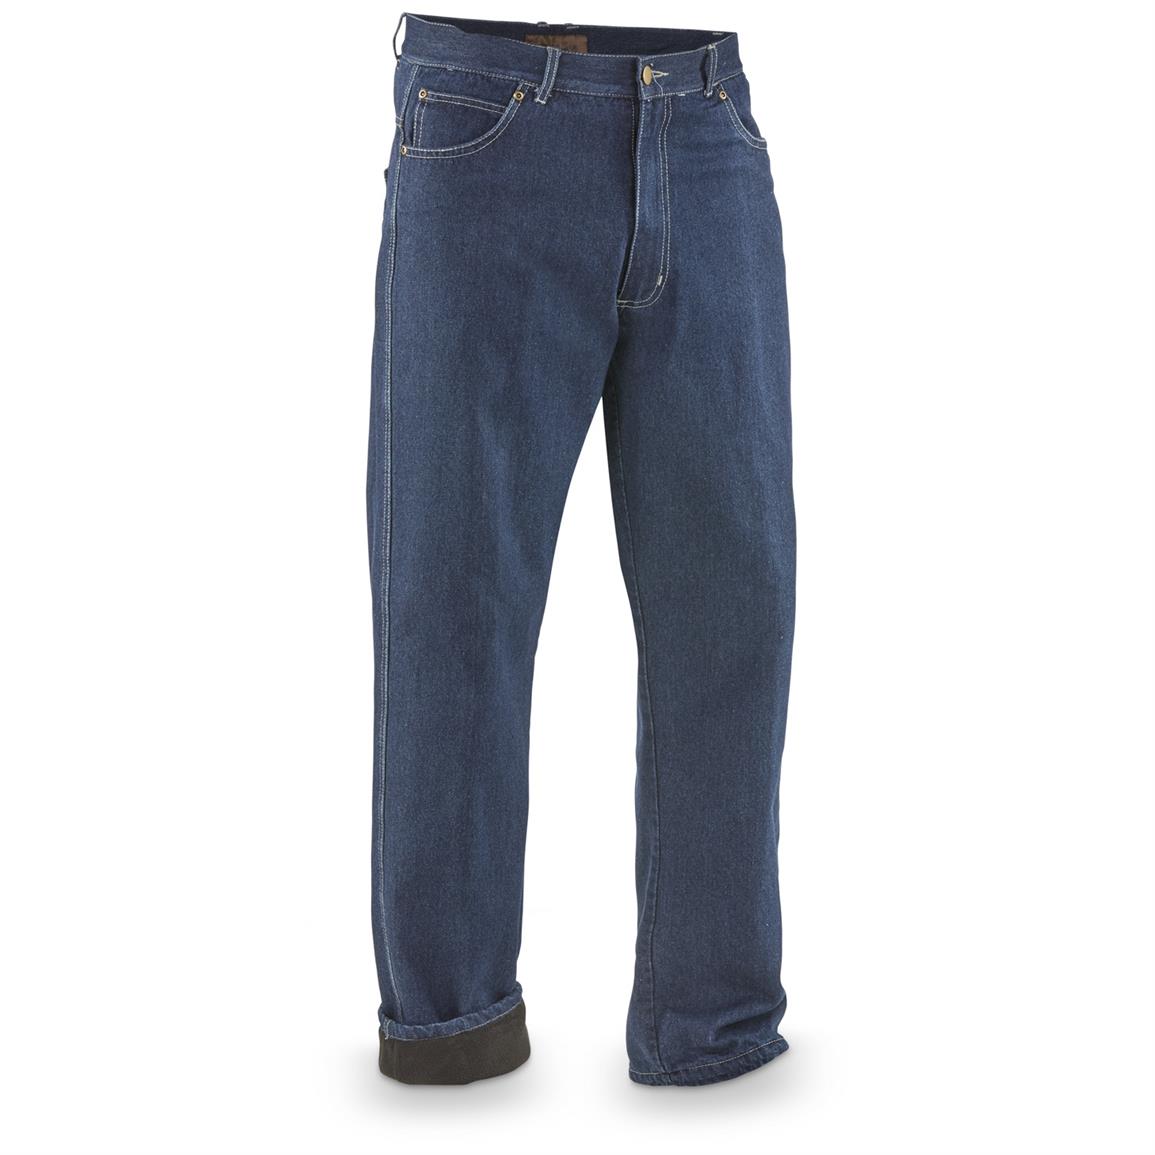 Marino Bay Fleece-lined Jeans - 639191, Insulated Pants, Overalls ...